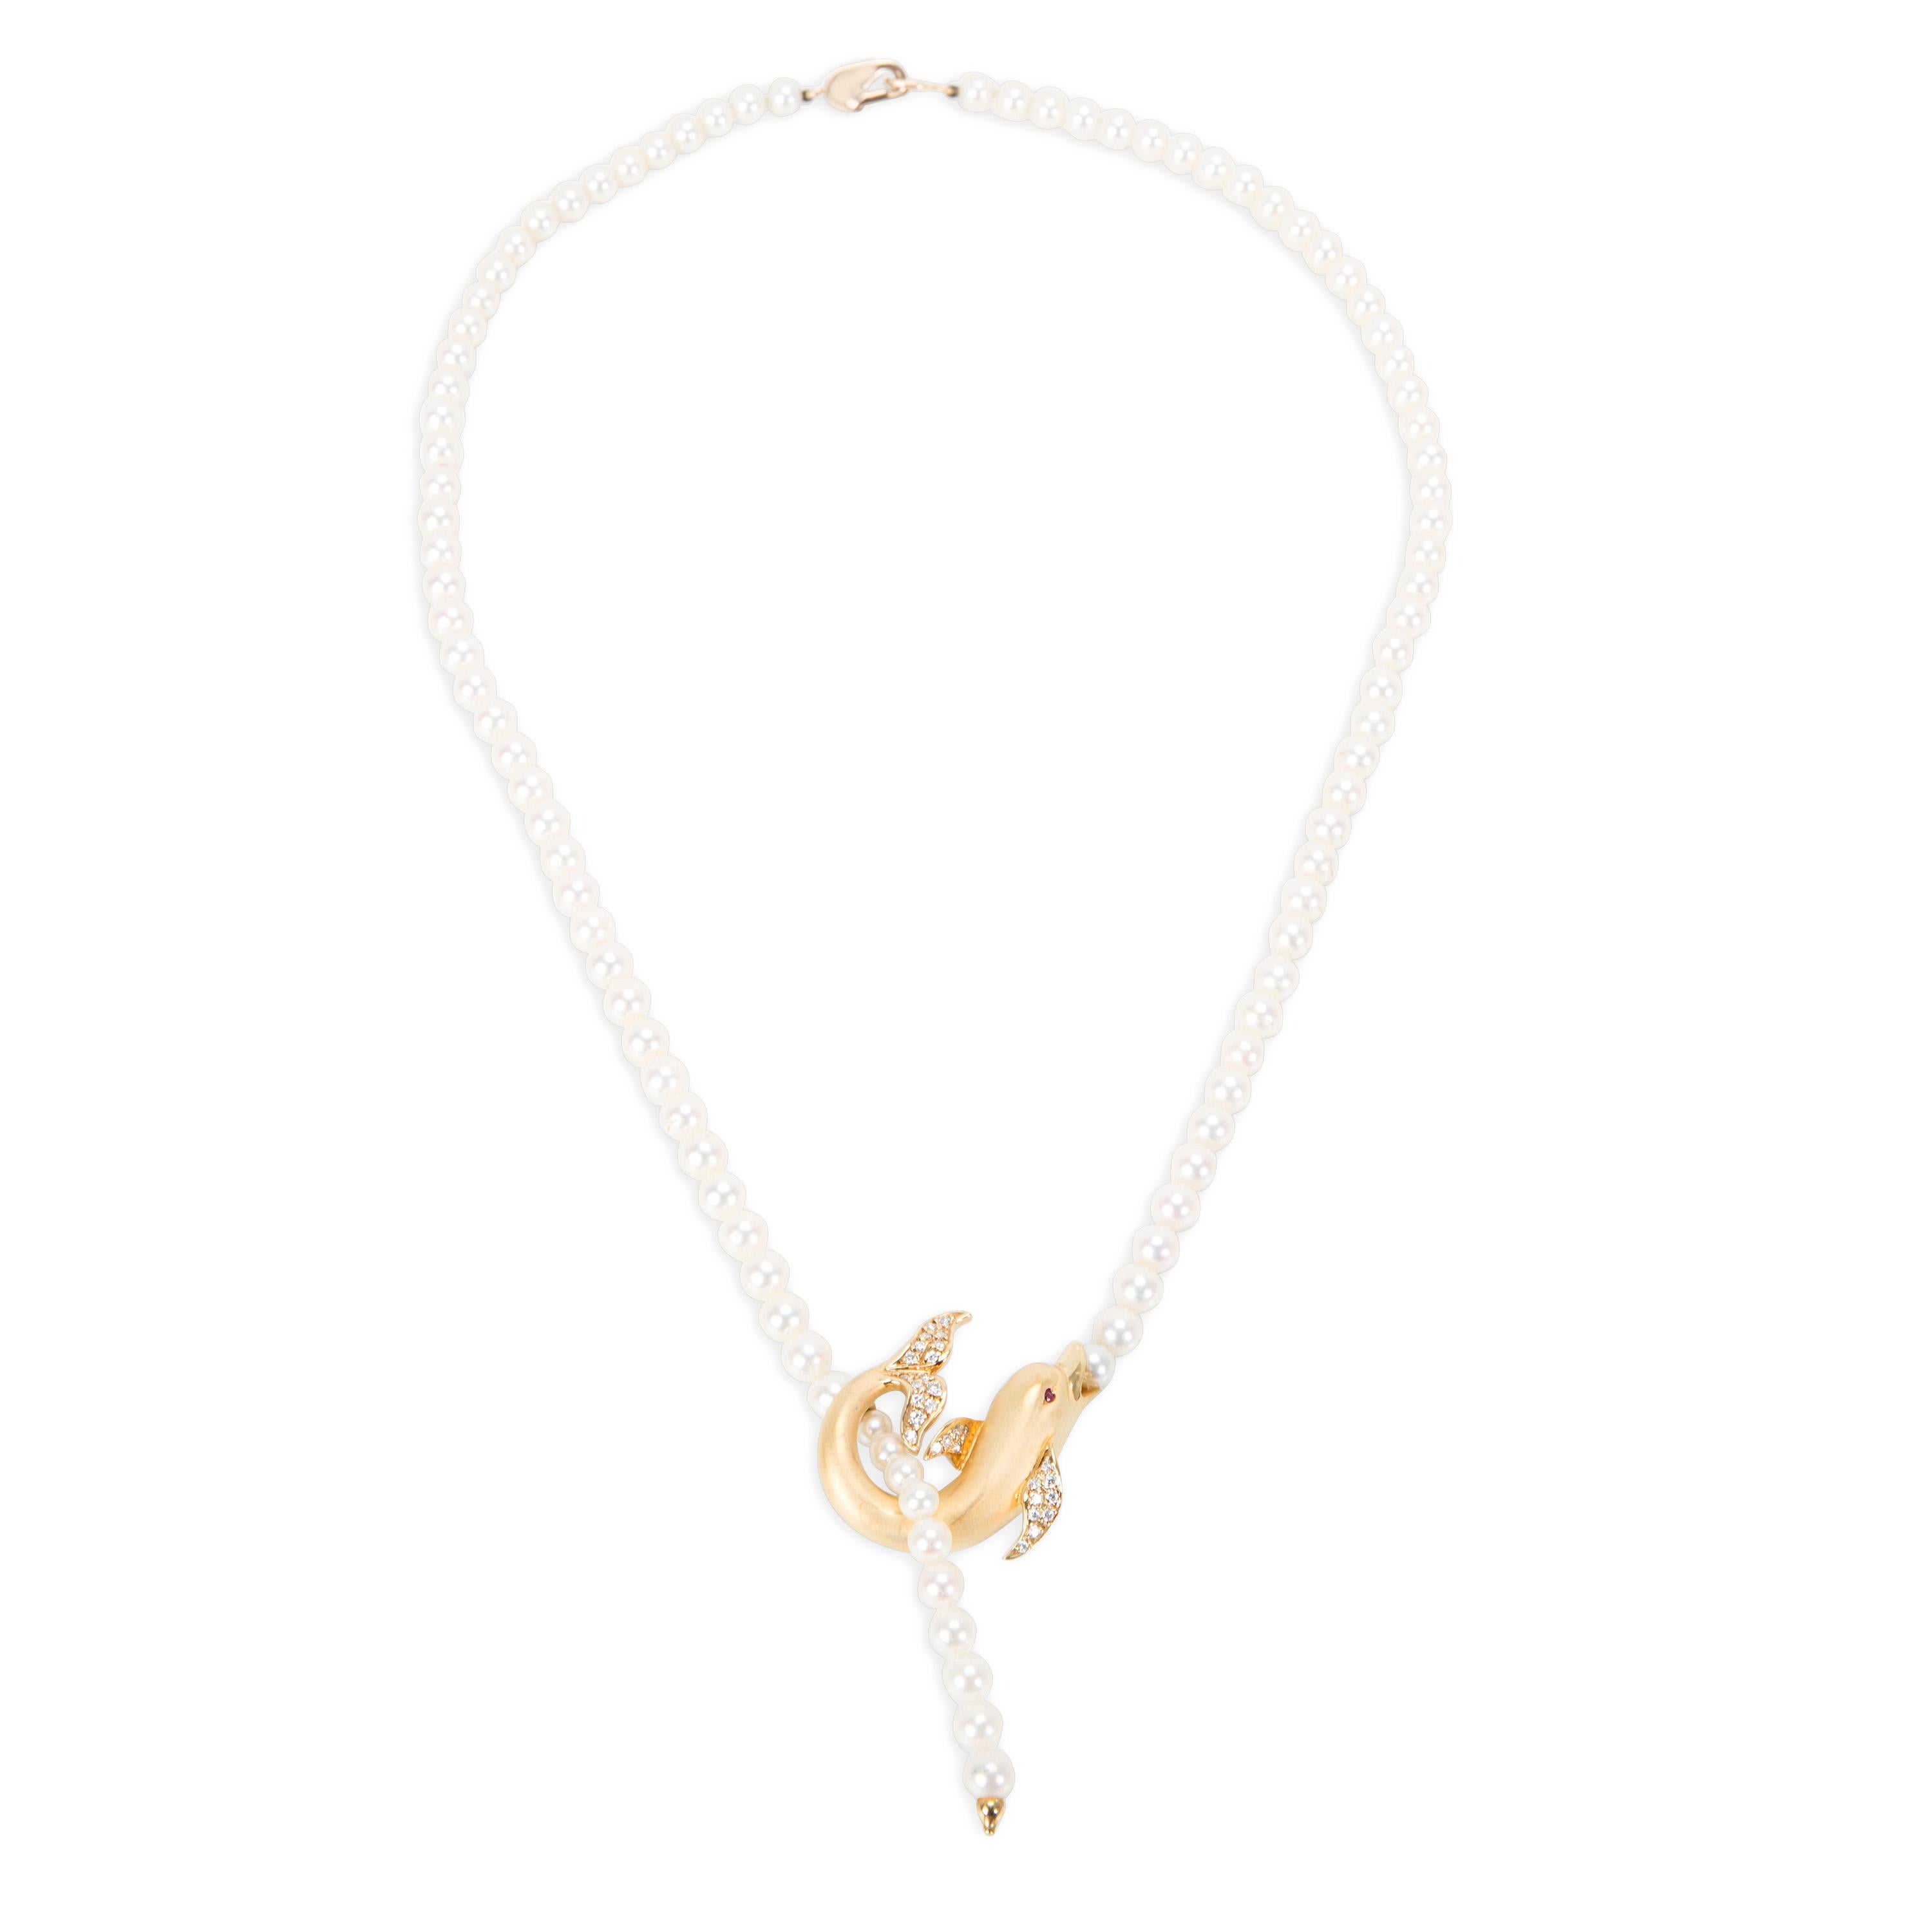 
Carrera y Carrera Diamond Textured Dolphin Necklace in 18K Yellow Gold 0.15 CTW

PRIMARY DETAILS
SKU: 097957
Listing Title: Carrera y Carrera Diamond Textured Dolphin Necklace in 18K Yellow Gold 0.15 CTW
Condition Description: Retails for 7500 USD.